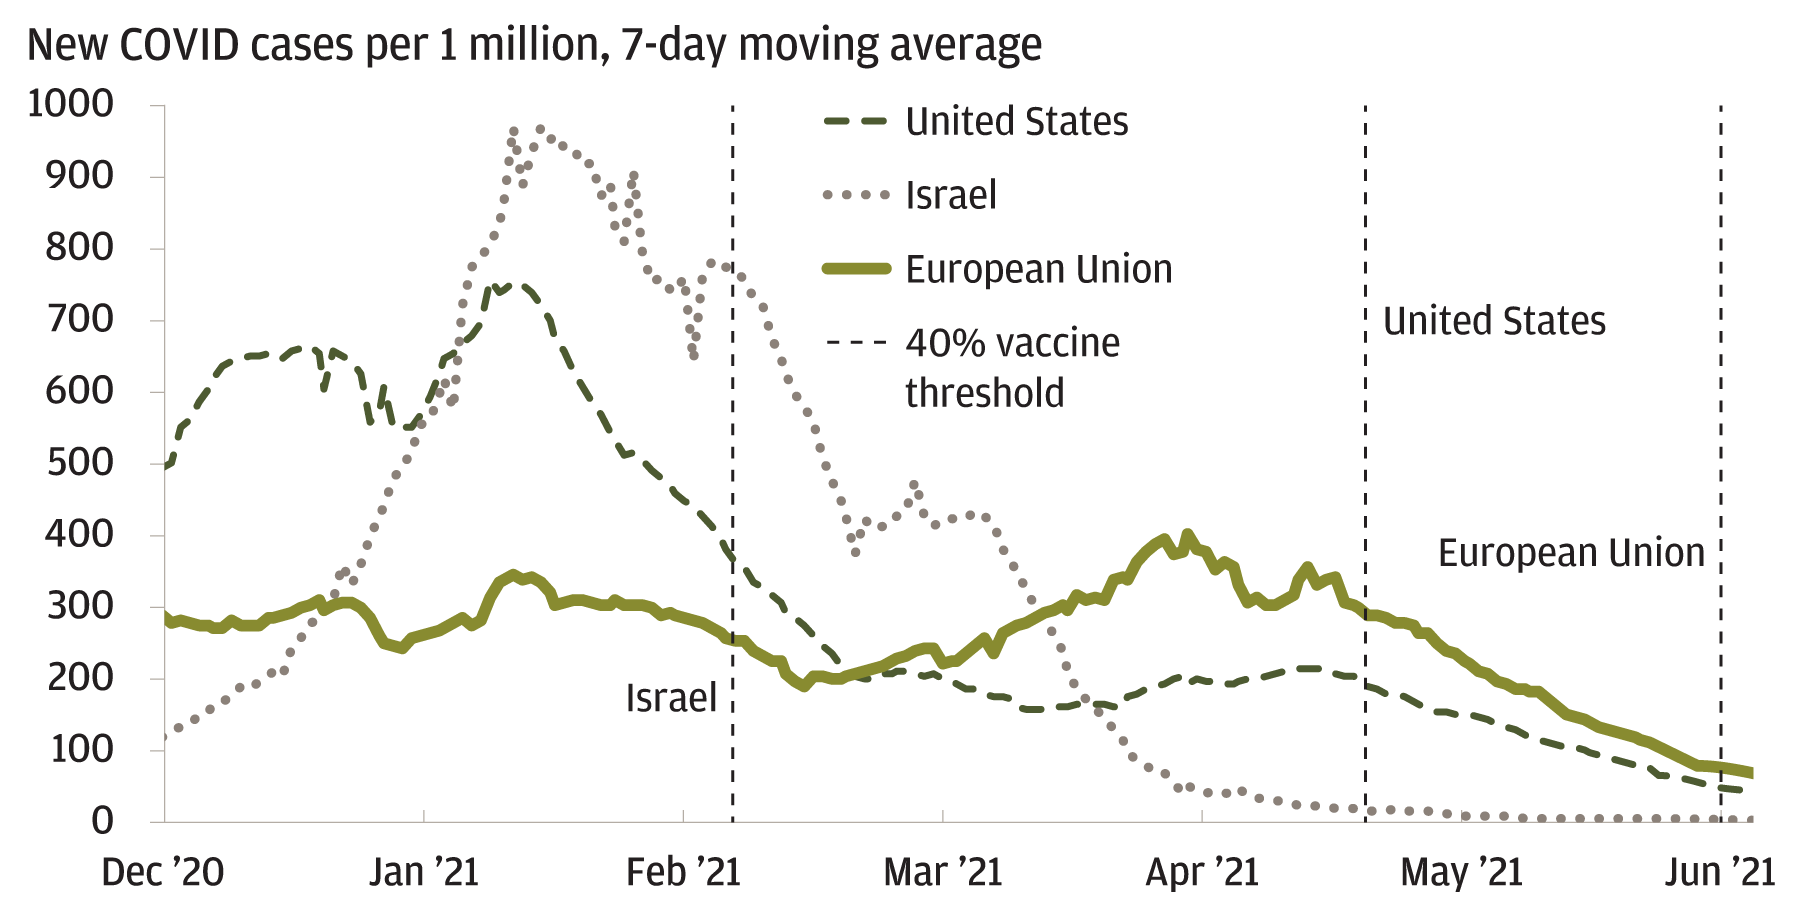 Chart 1: New COVID-19 cases per million, 7-day moving average